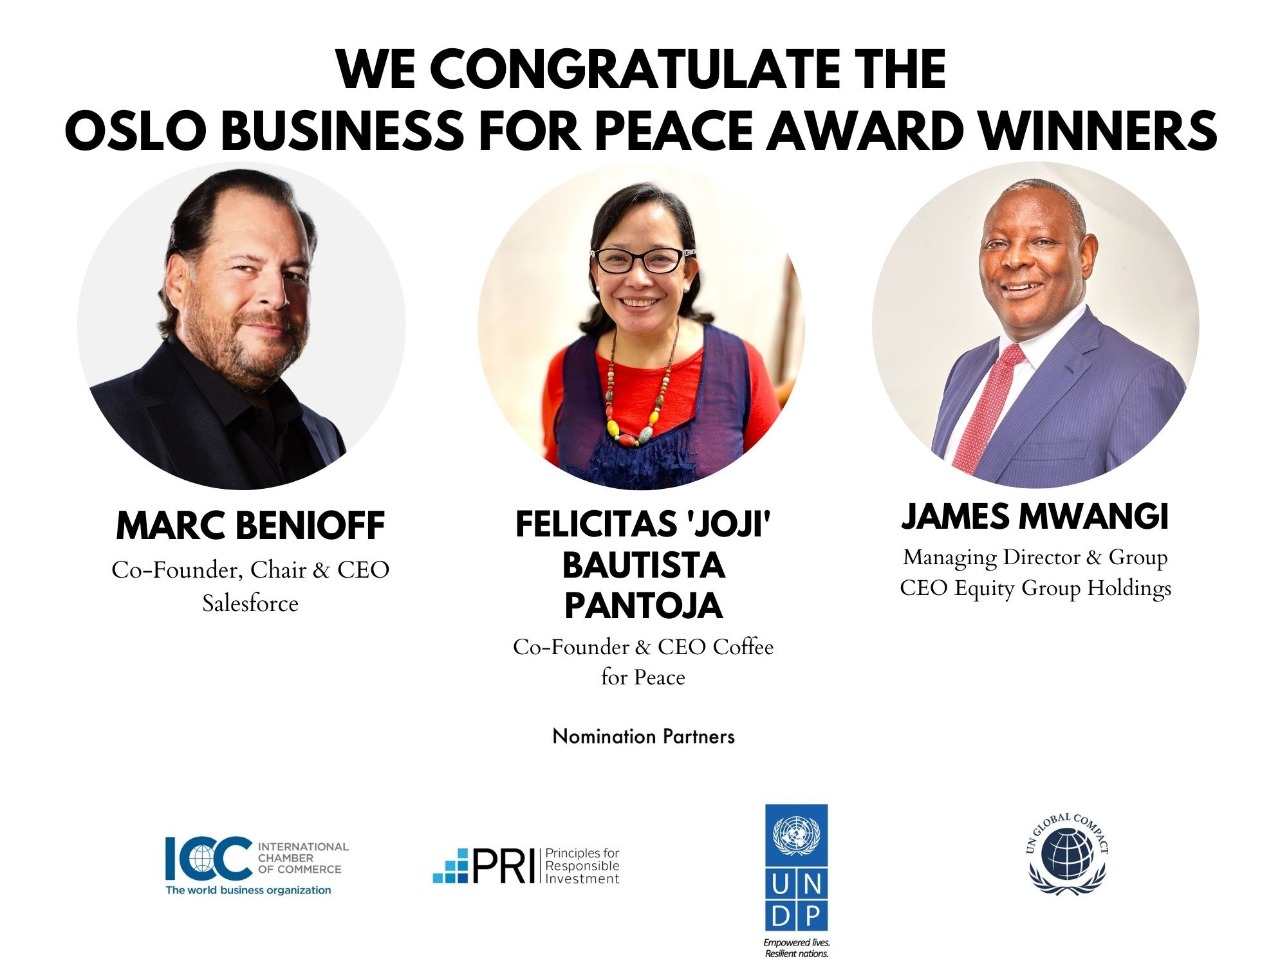 Equity CEO, Dr. James Mwangi, wins coveted Oslo Business for Peace Award